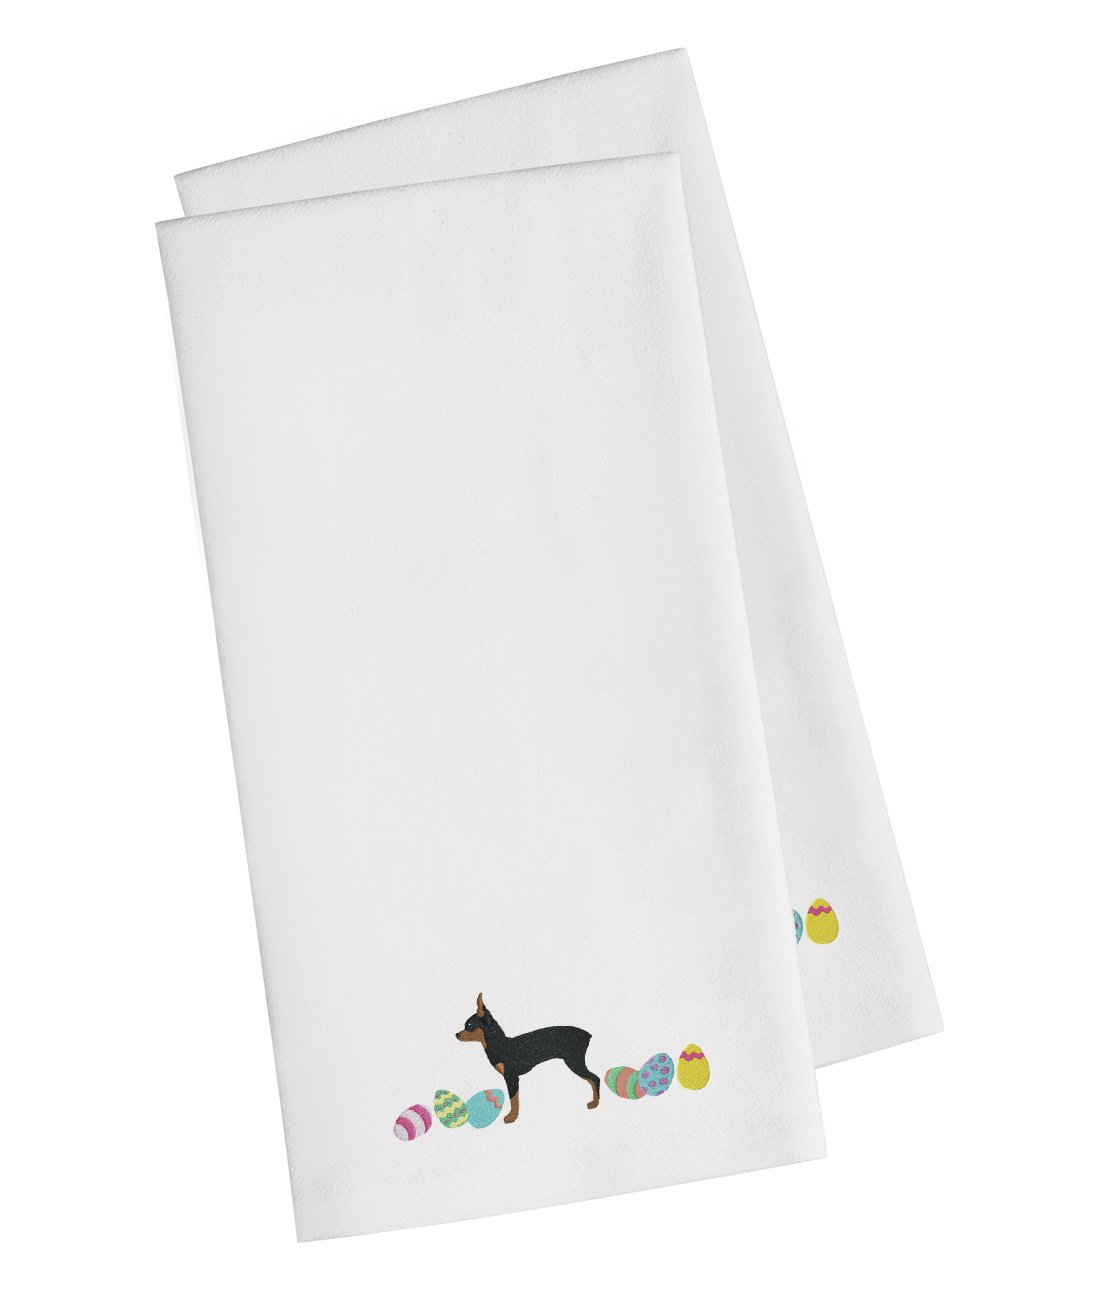 Toy Fox Terrier Easter White Embroidered Kitchen Towel Set of 2 CK1690WHTWE by Caroline's Treasures